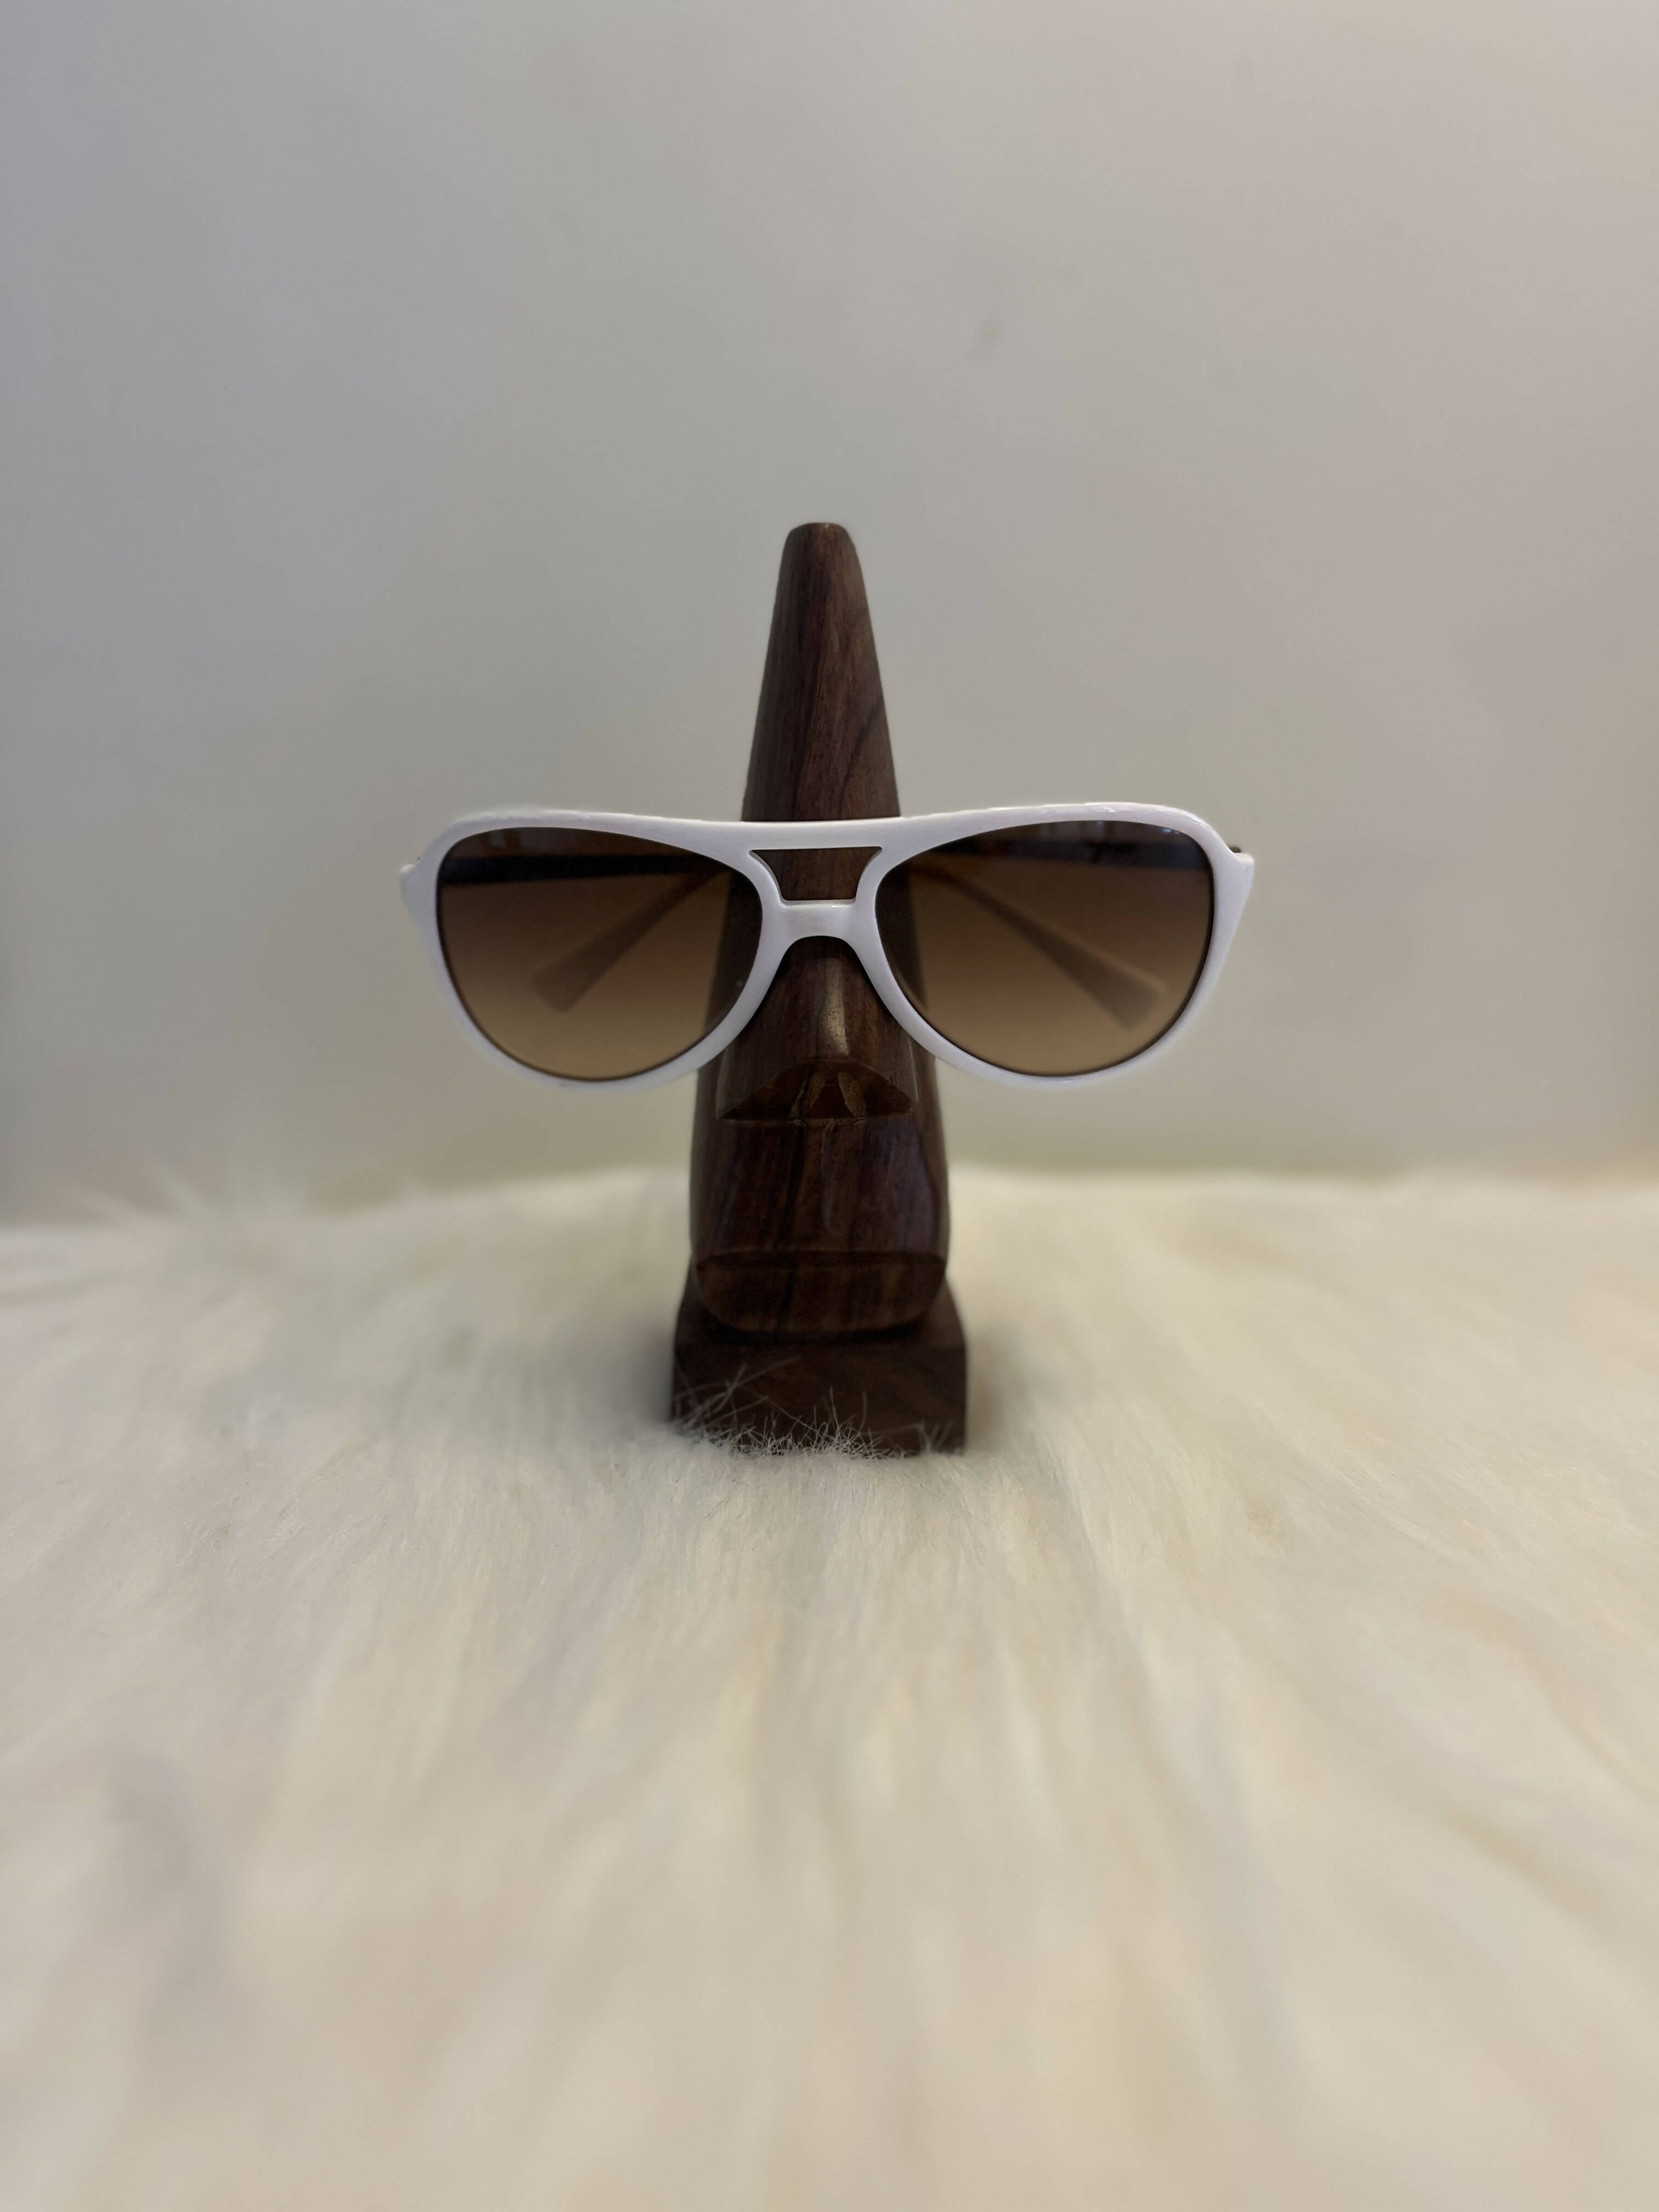 Wooden Nose Shaped Spectacle Holder Wemy Store